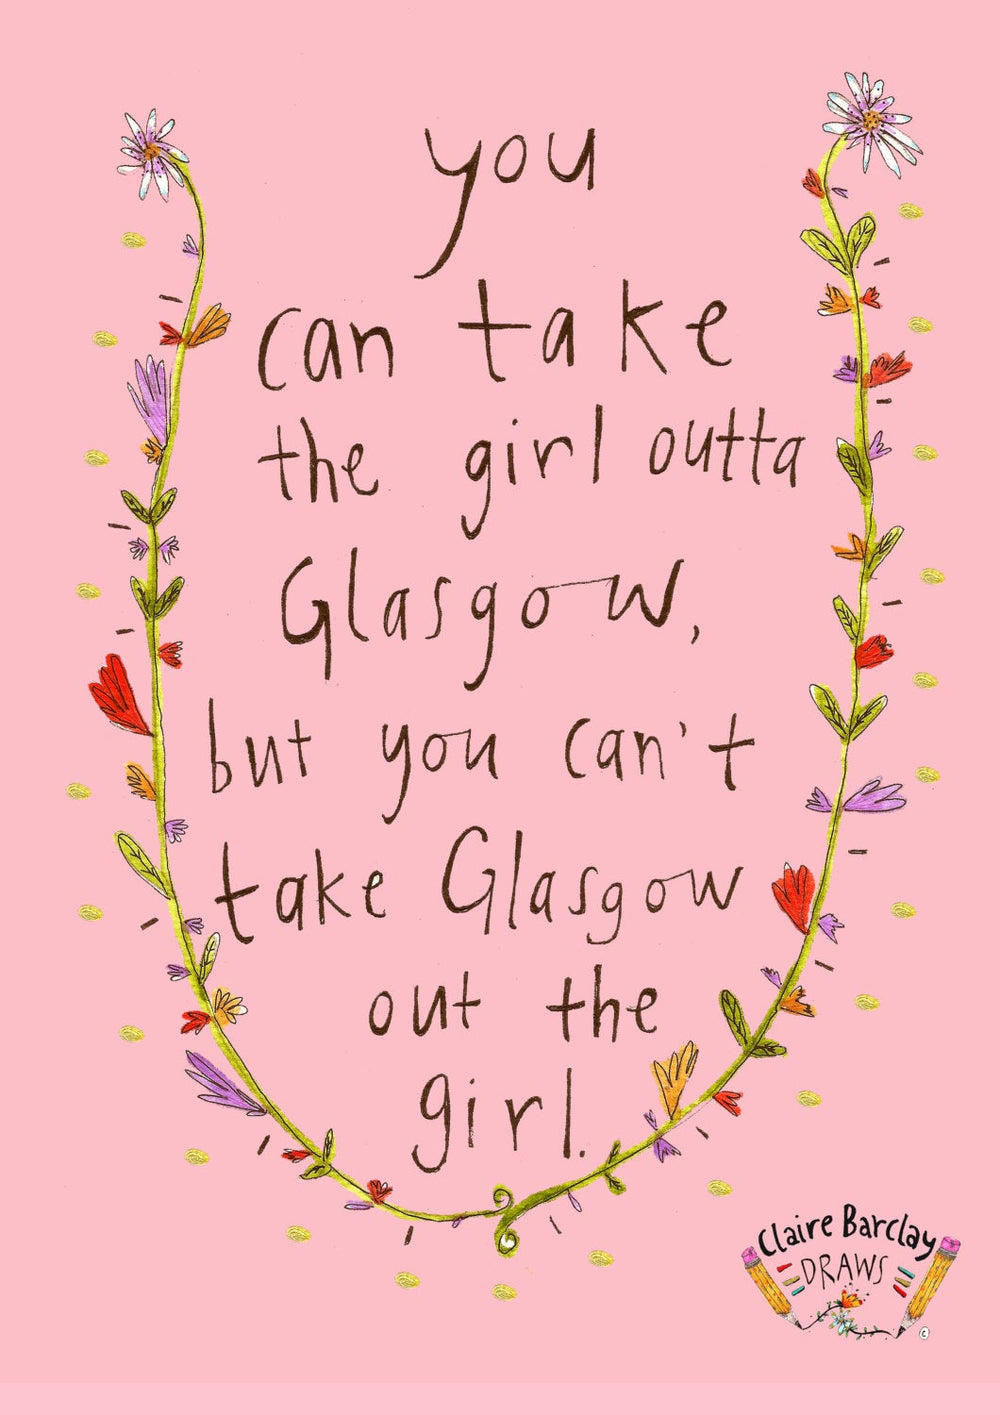 You Can Take the Girl Outta Glasgow, but Can't Take Glasgow Out the Girl Cotton Tote Bag